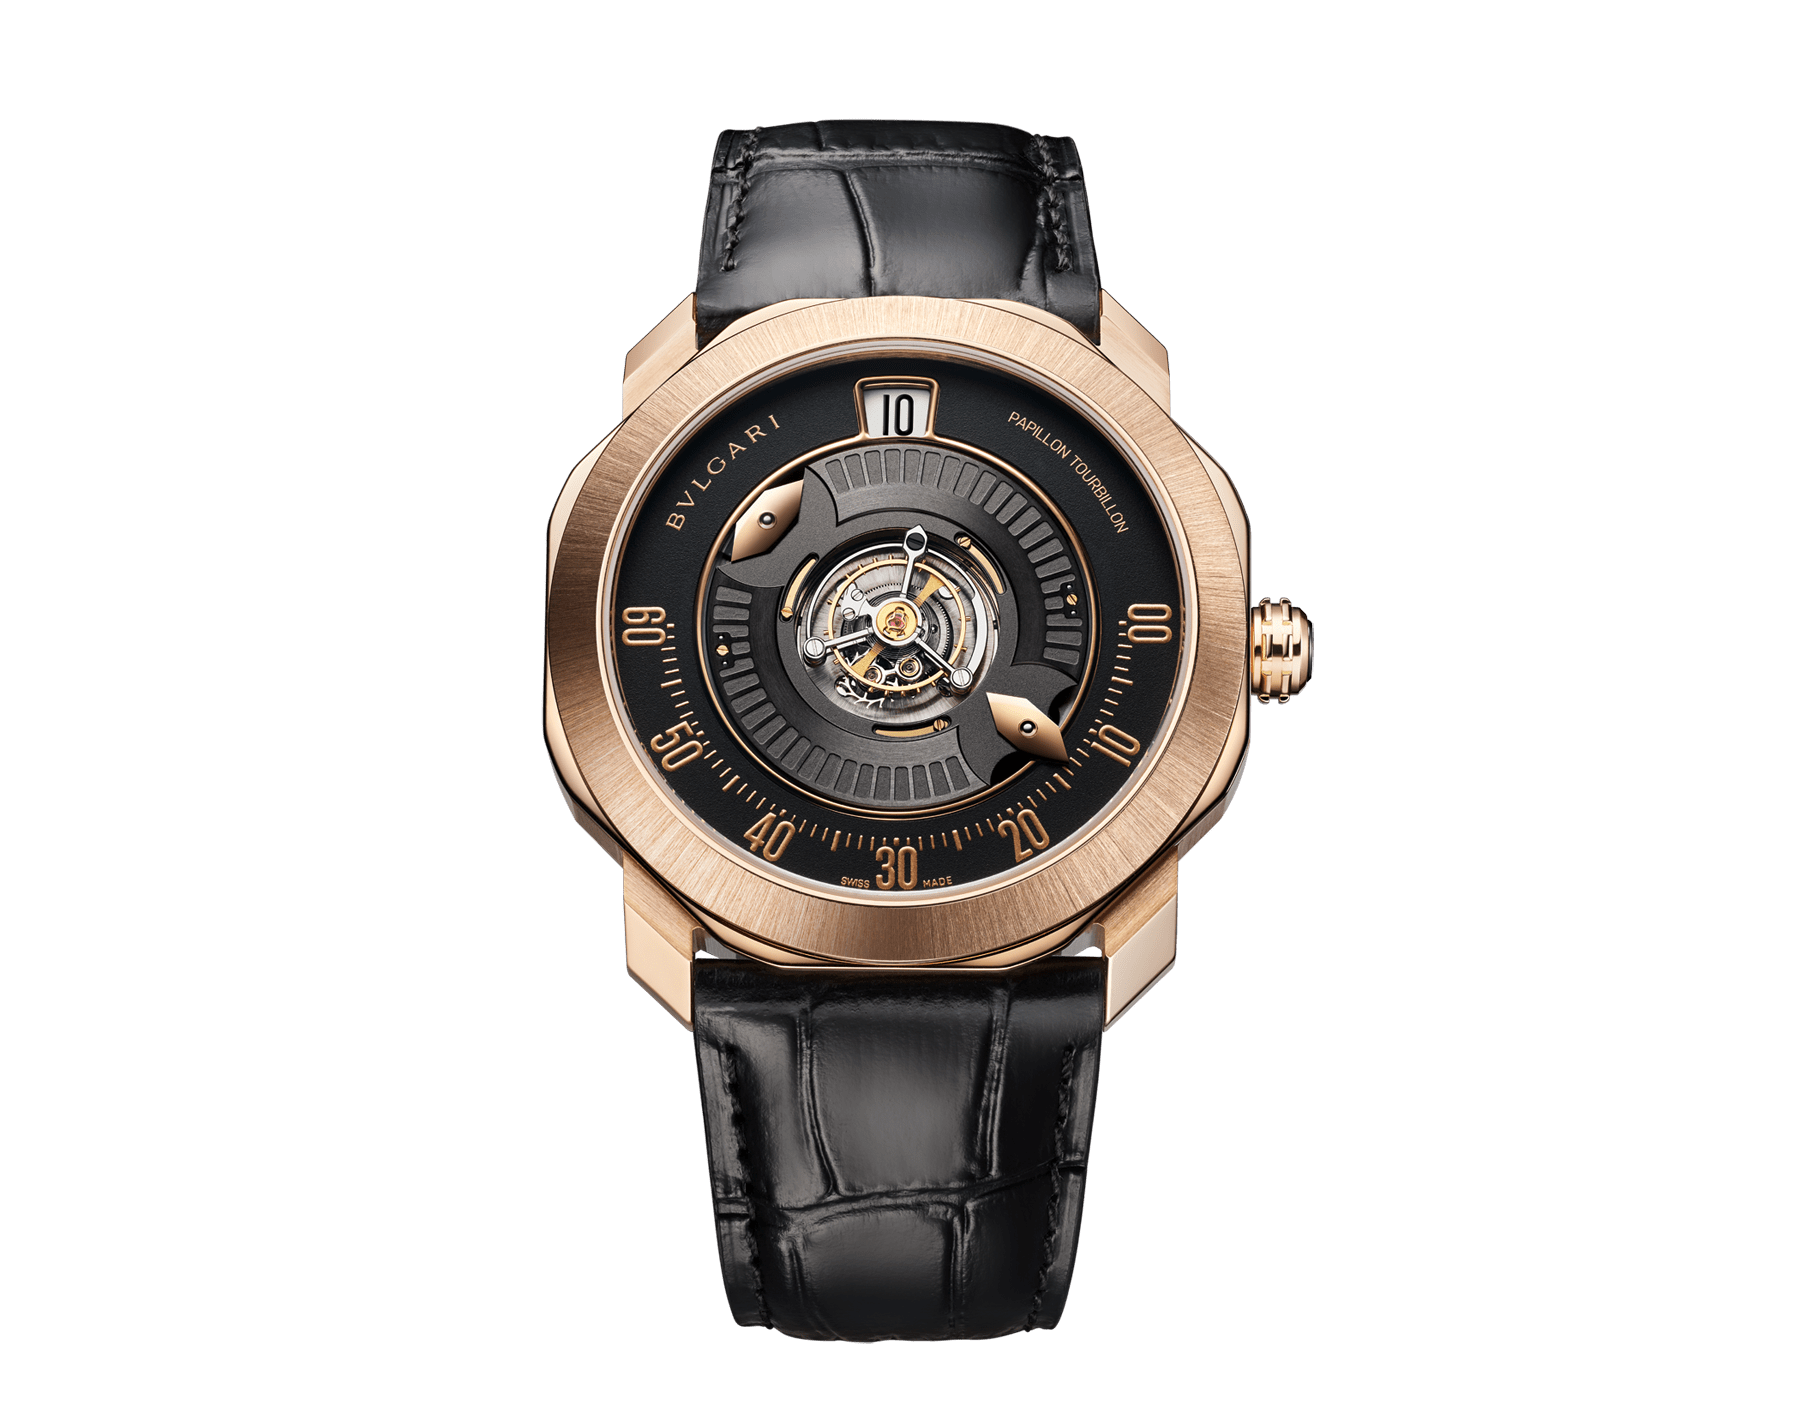 Octo Roma Papillon Central Tourbillon with mechanical manufacture movement, manual winding, central flying tourbillon, minutes indication with two 18 kt rose gold Papillon hands, 24-hour jumping hour, ceramic ball bearing system, 18 kt rose gold case, black matt dial, tourbillon cage and Papillon system opening, transparent sapphire caseback, matt black alligator bracelet and 18 kt rose gold folding clasp. Water-resistant up to 50 metres 103475 image 1